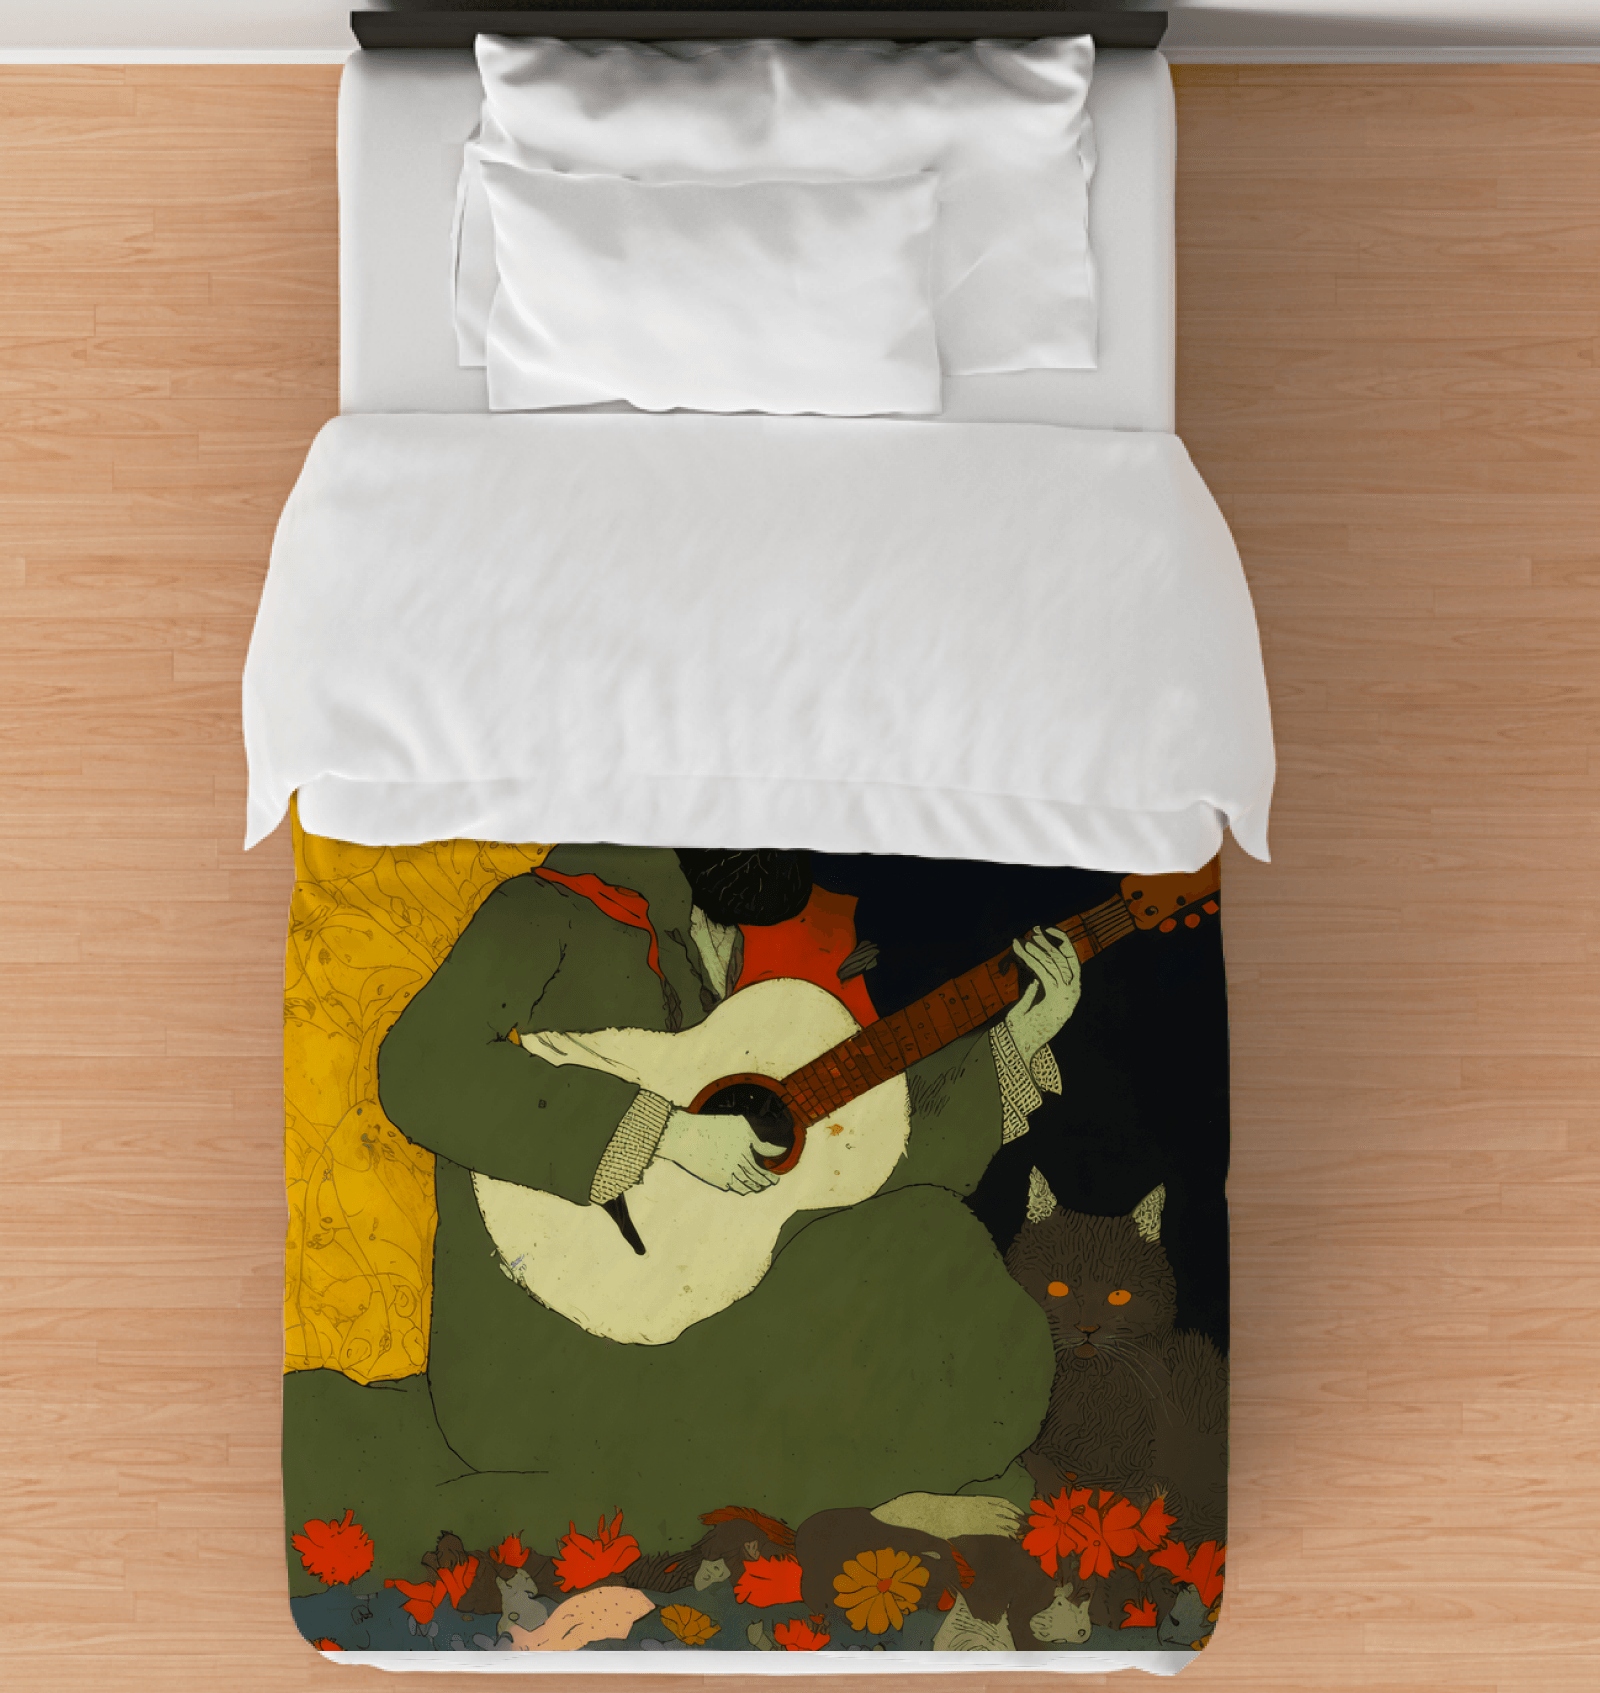 SurArt 73 Duvet Cover displayed on bed, showcasing its modern style and cozy appeal.